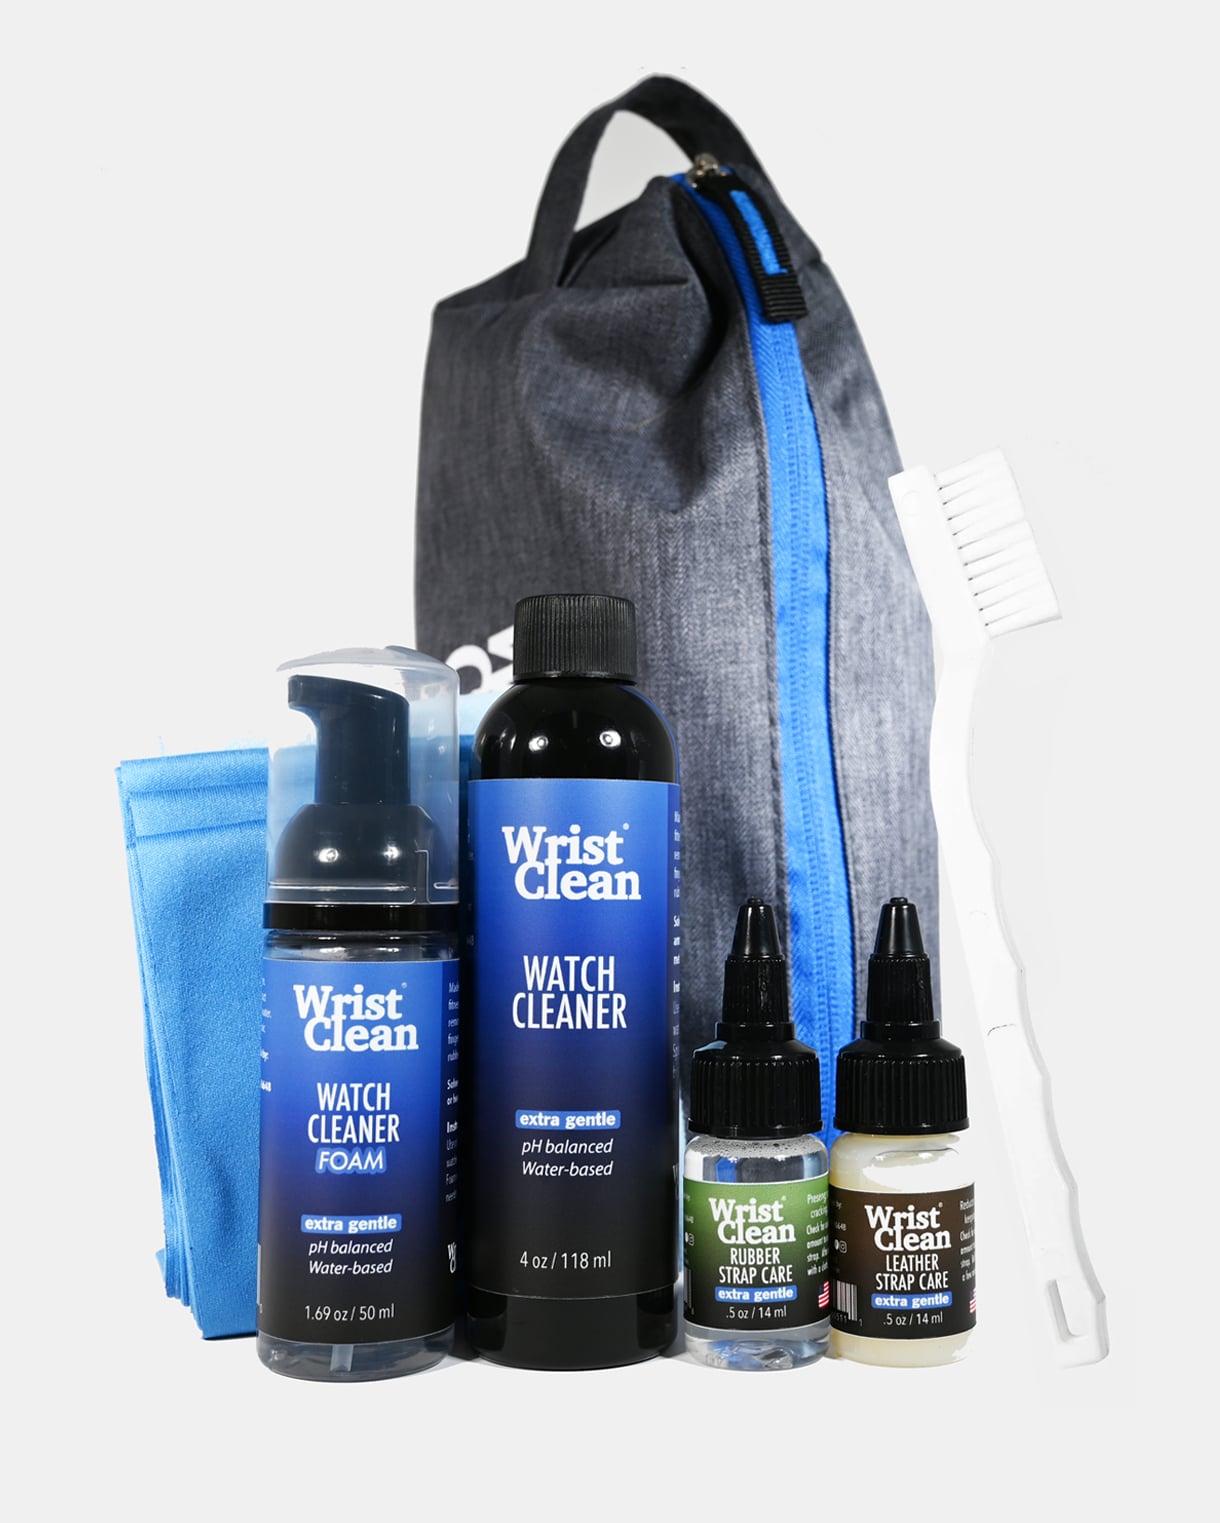 The Best Watch Cleaning Care Kit – WristClean